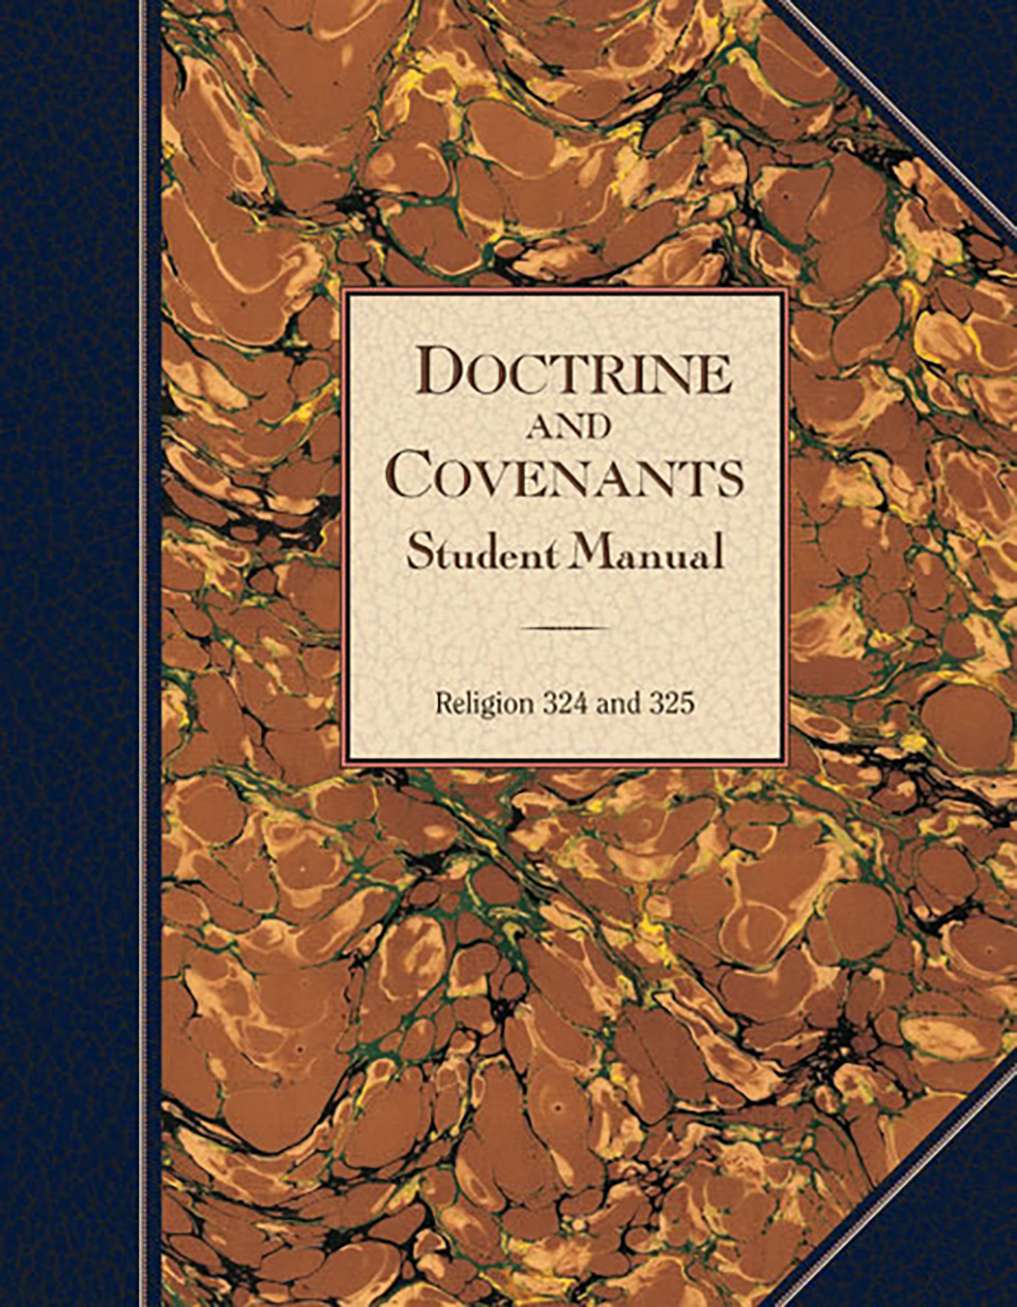 Doctrine and Covenants Student Manual (Religion 324-325)